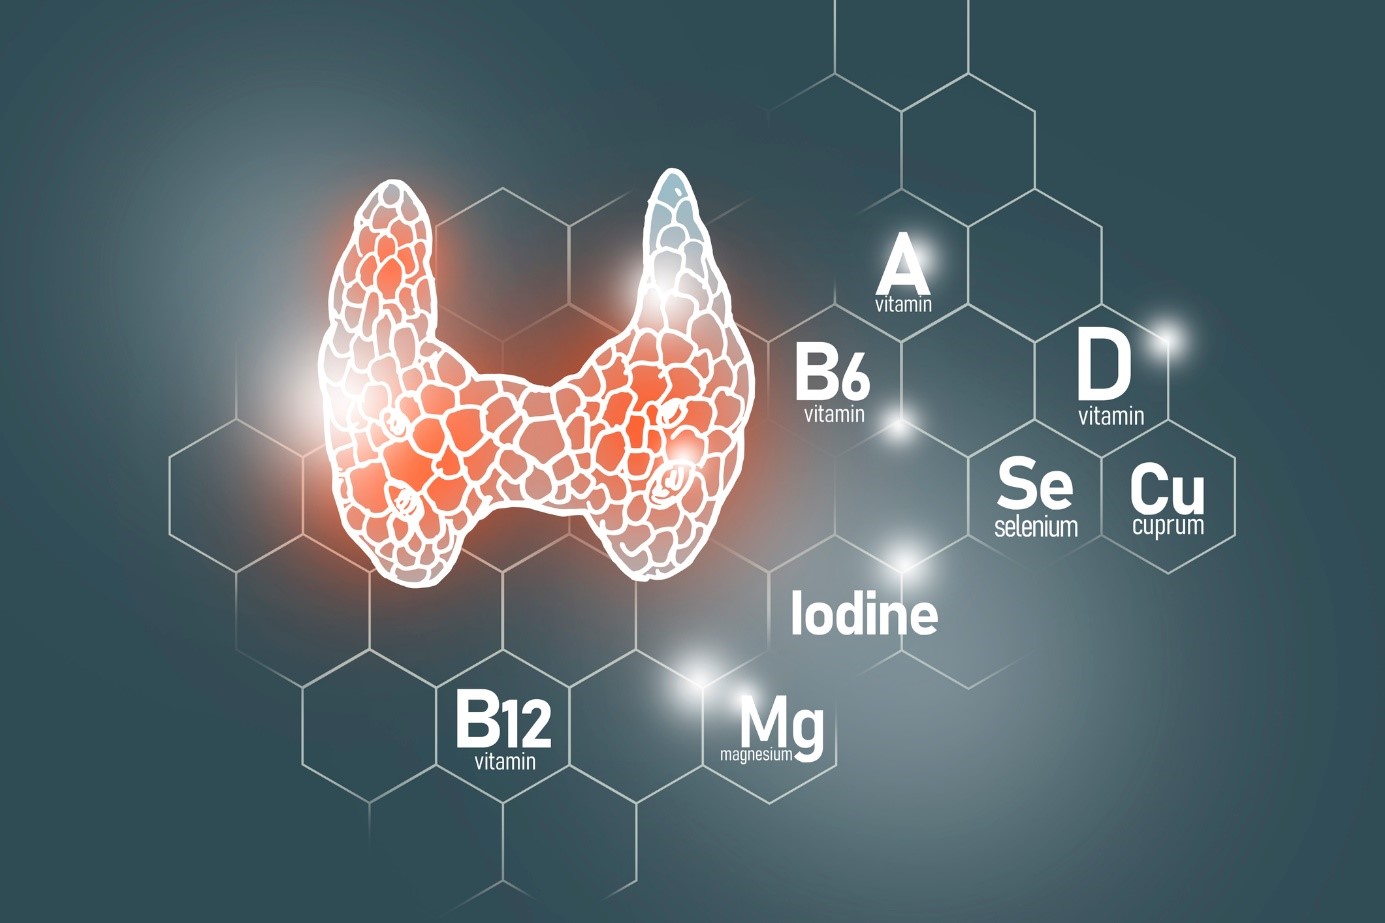 Selenium as an important element for proper thyroid function